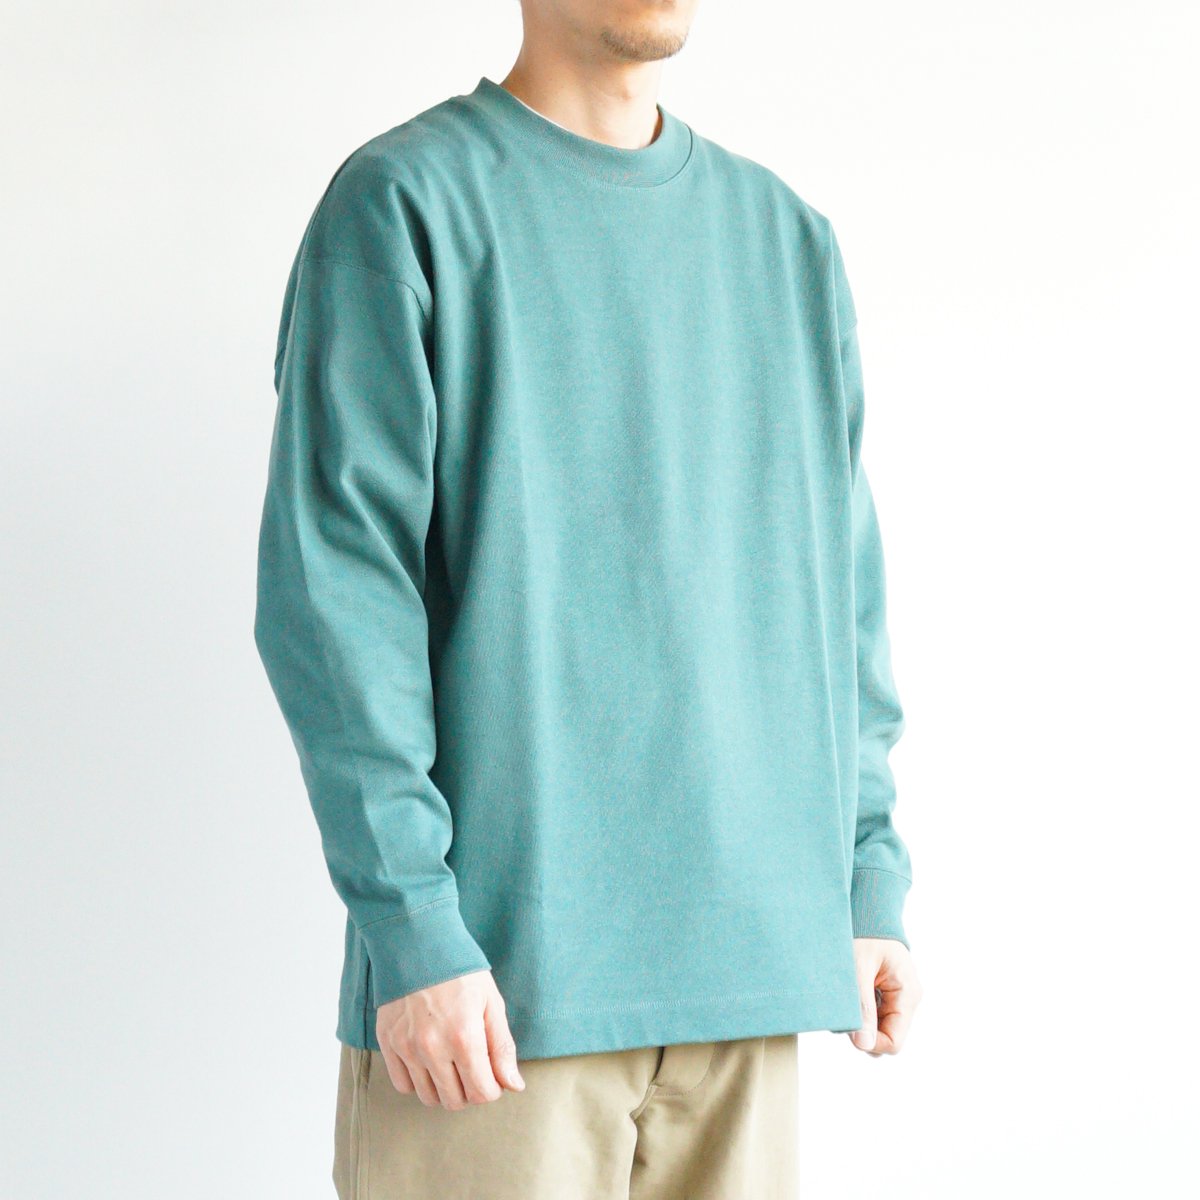 SUVIN AIR DOUBLE CREW NECK PULLOVER - 香川県高松市のセレクトショップ IHATOVE（イーハトーブ）  A.PRESSE,NEPENTHES,NICENESS,PORTER CLASSIC,WIRROWの通販